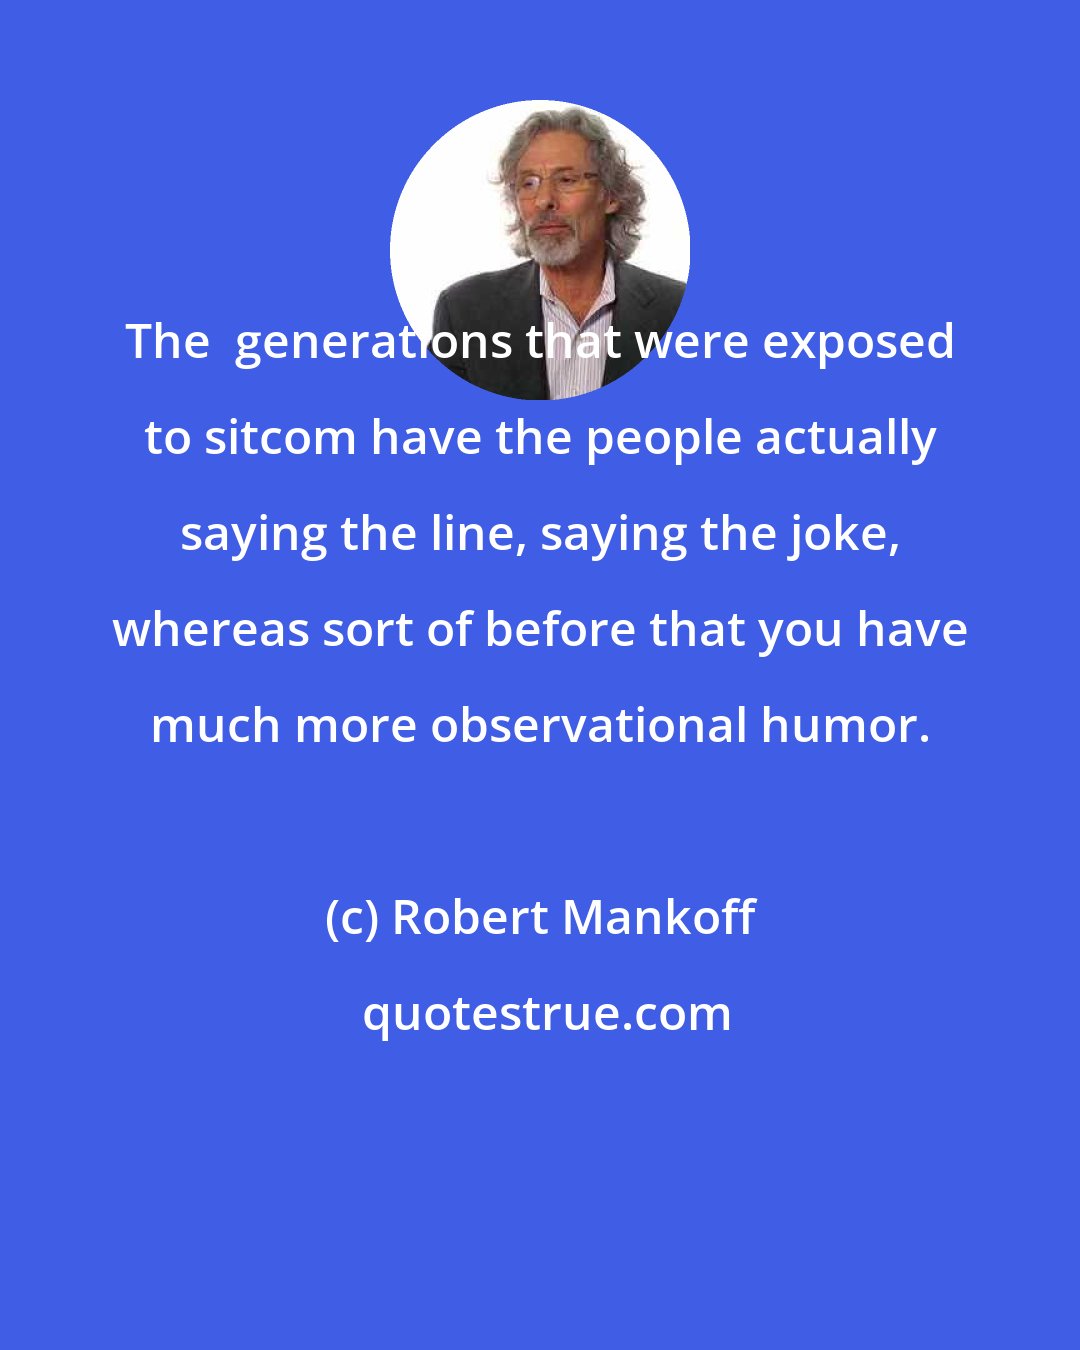 Robert Mankoff: The  generations that were exposed to sitcom have the people actually saying the line, saying the joke, whereas sort of before that you have much more observational humor.